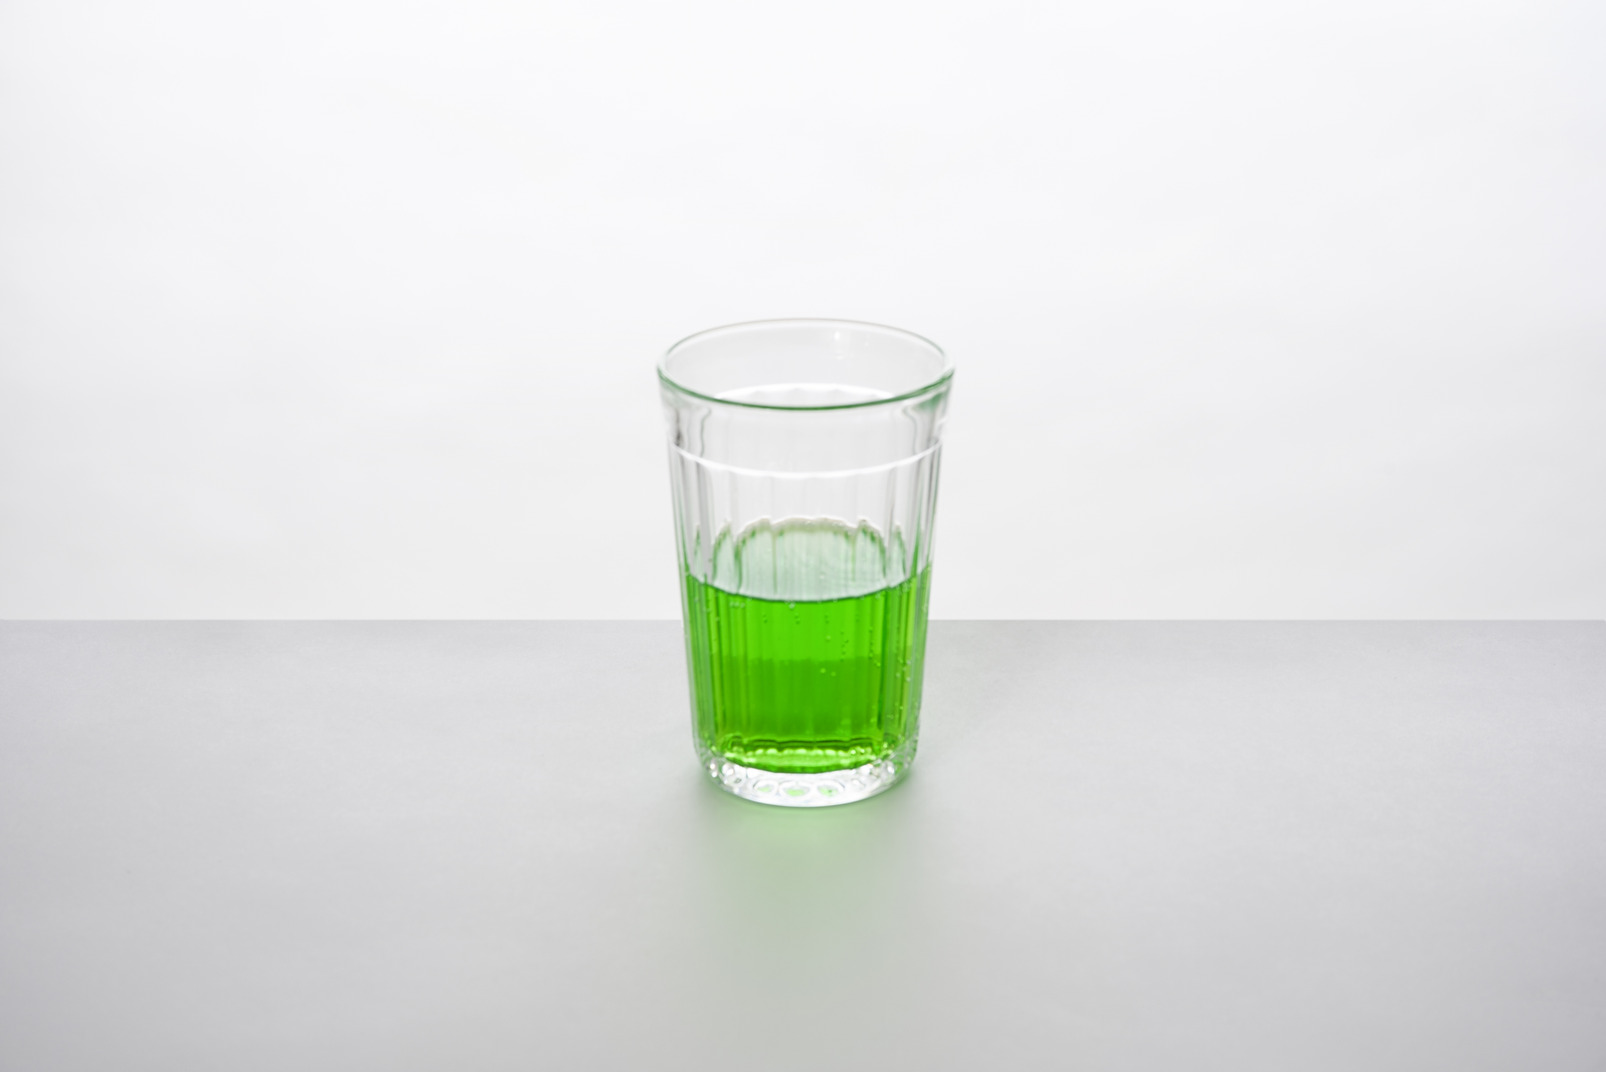 Green drinks for st patrick's day